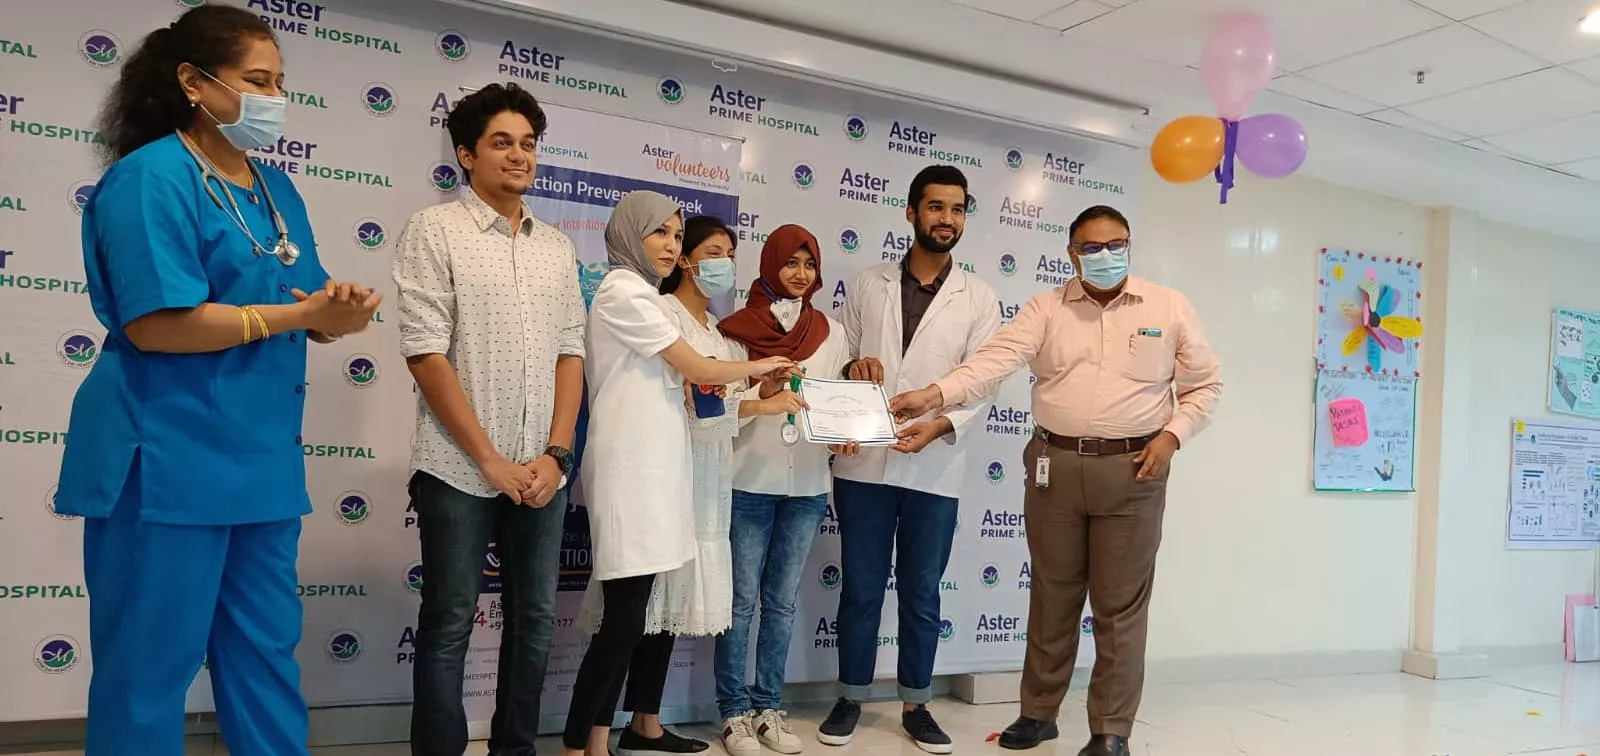 Infection Prevention Week Aster Prime Hyderabad